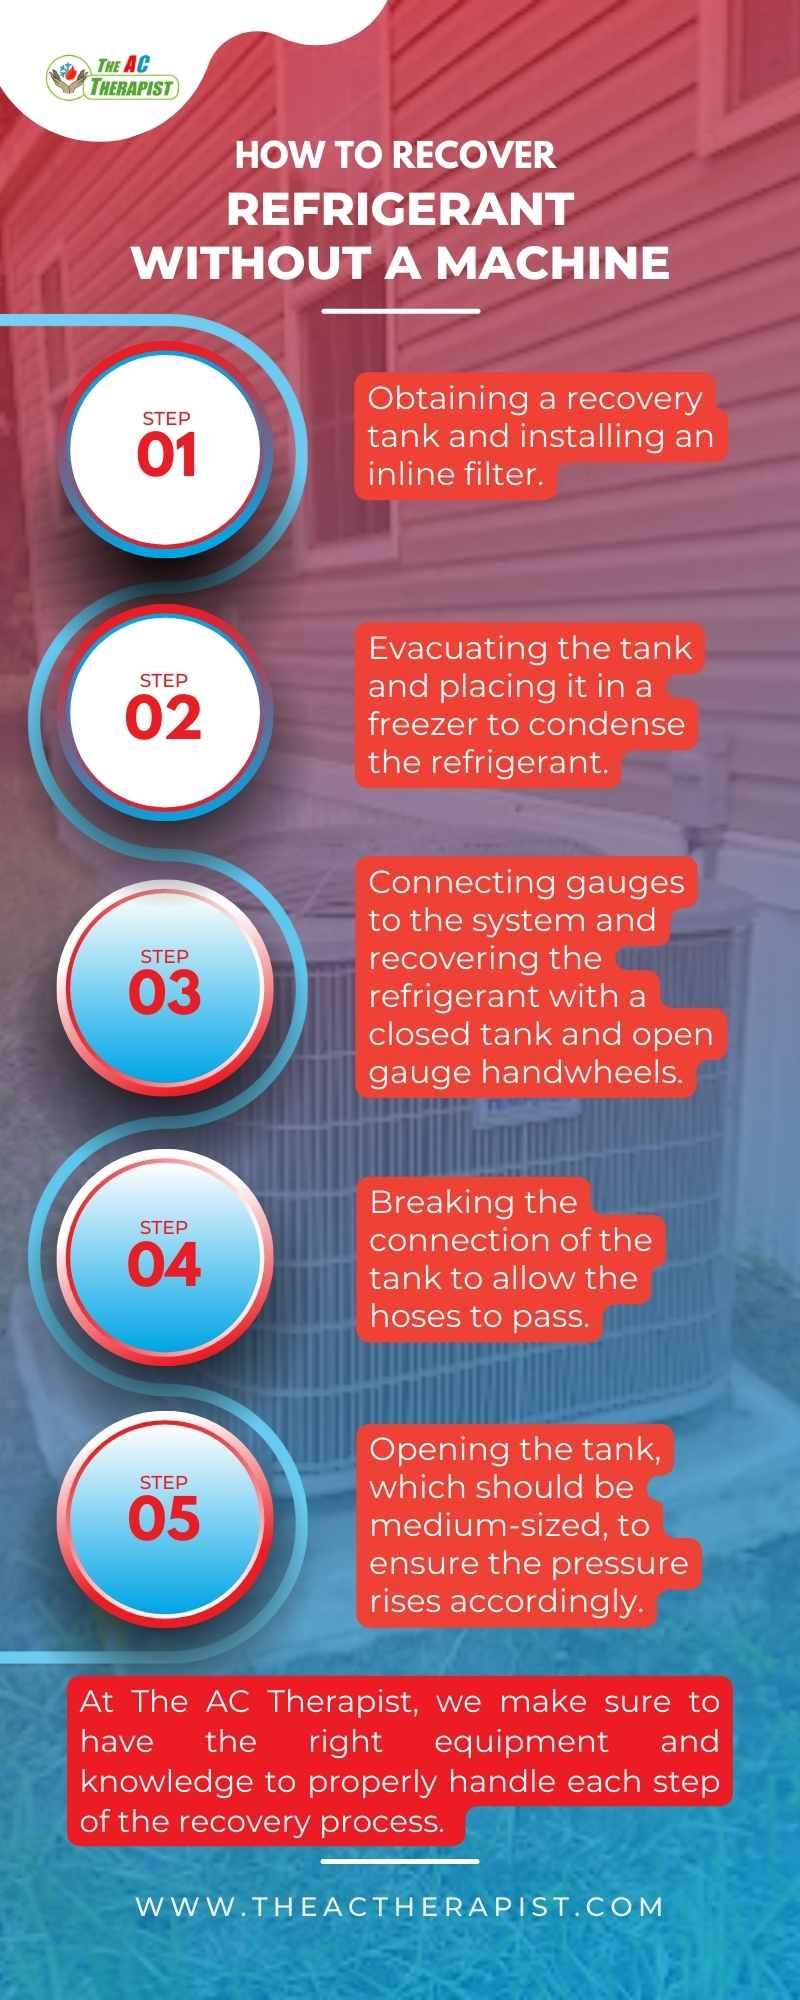 How to Recover Refrigerant Without a Machine-Infographic